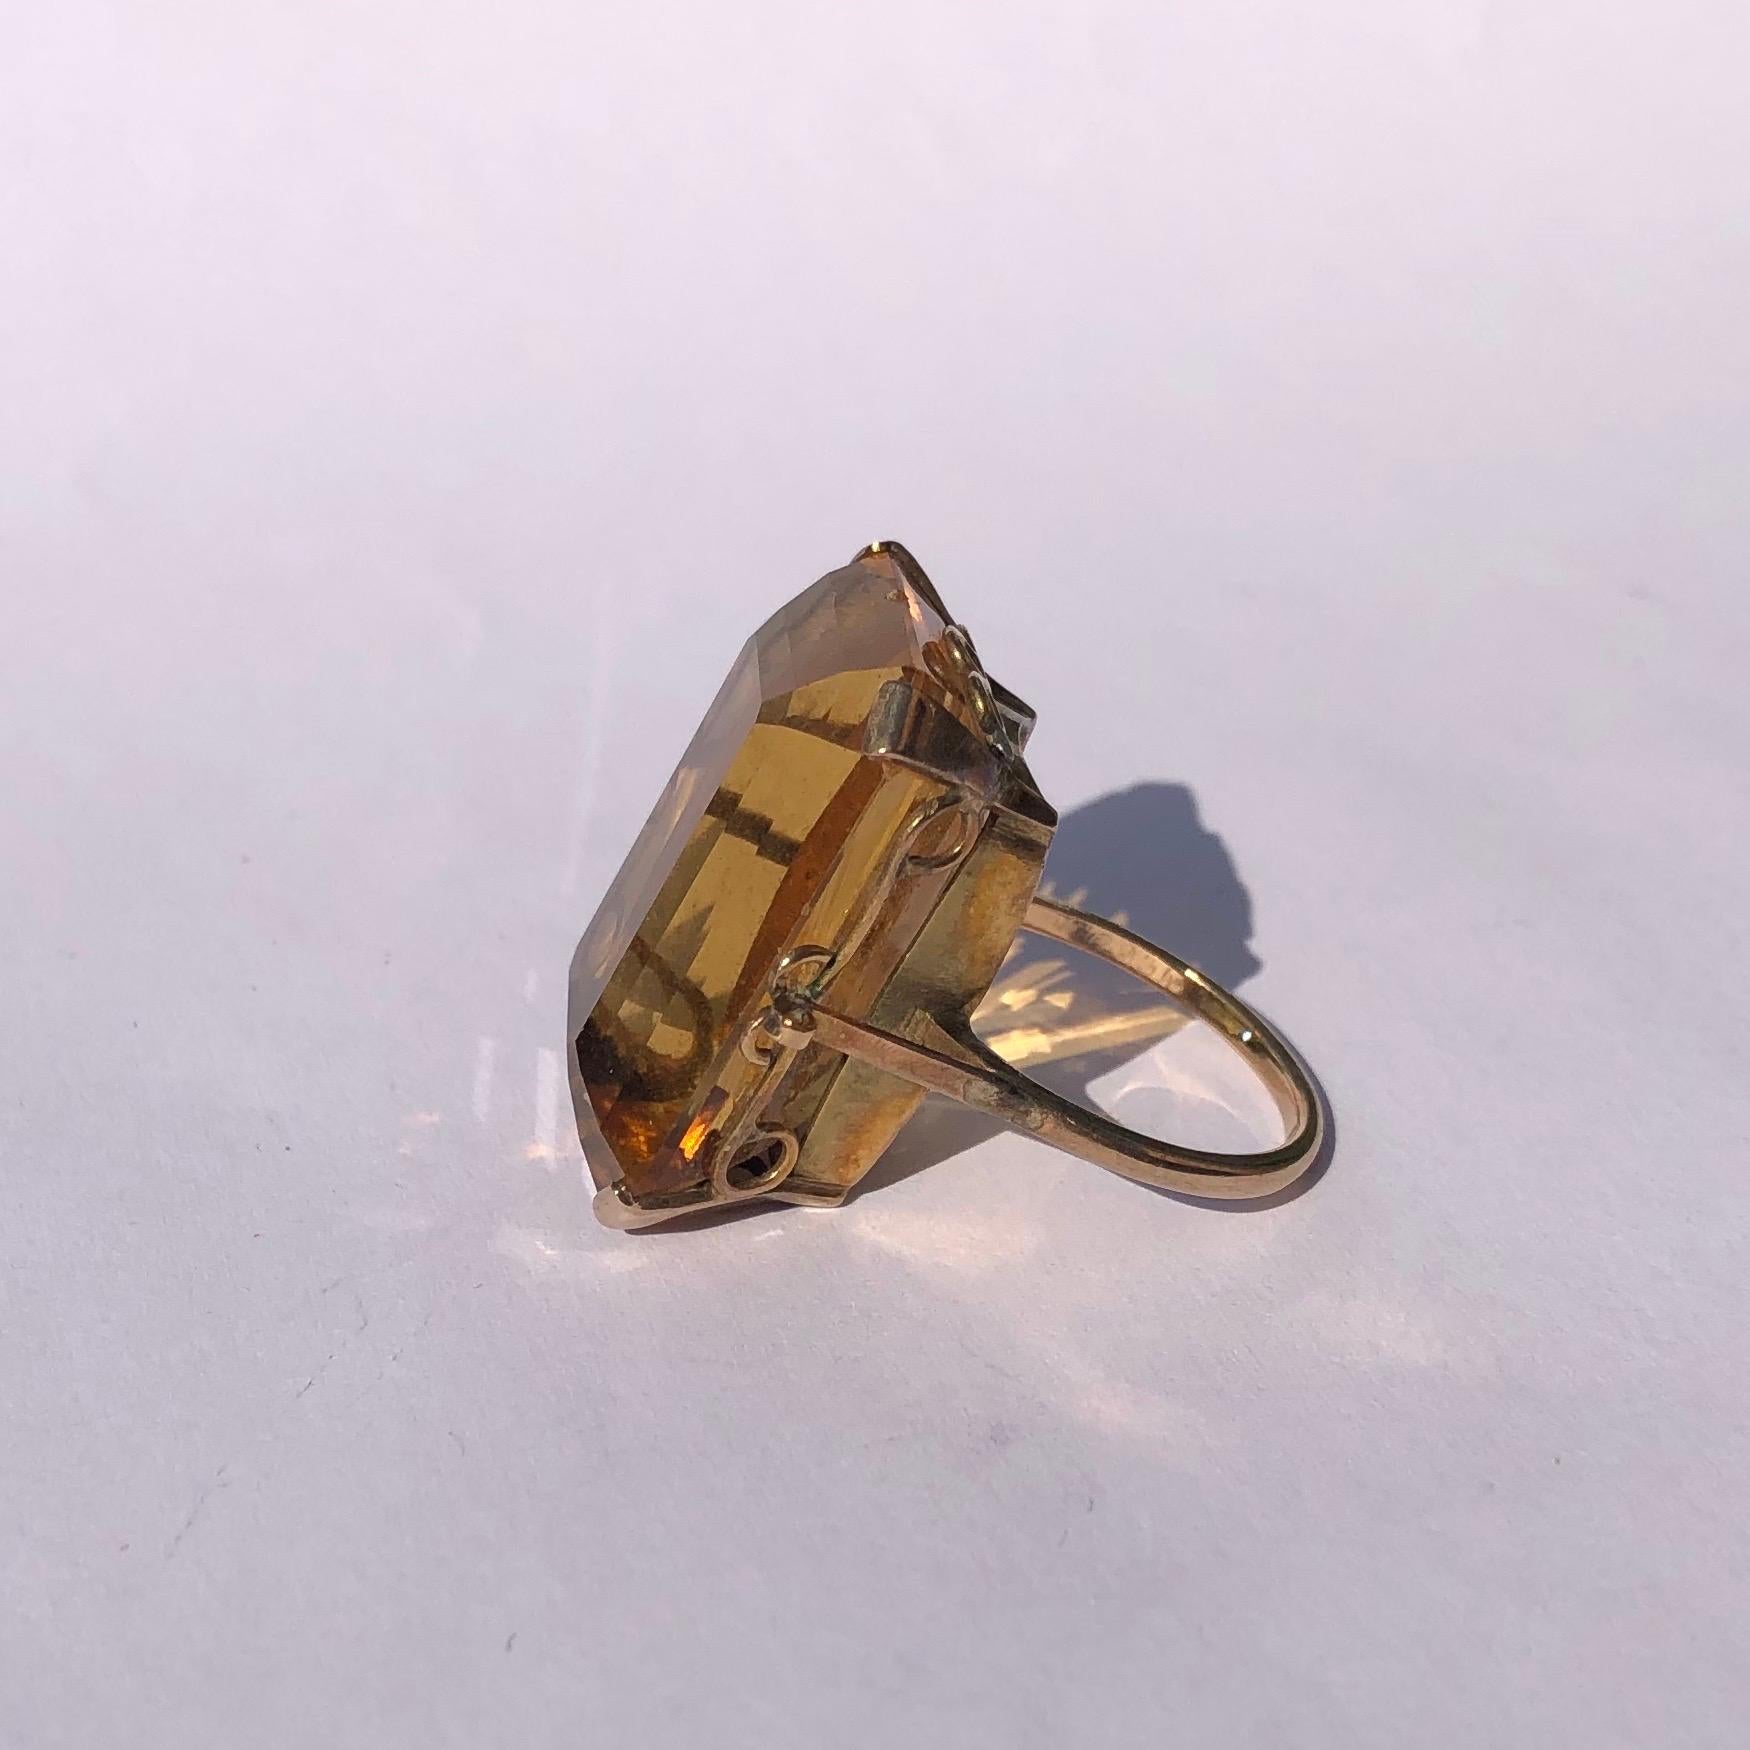 The rich coloured citrine stone is held by a very delicate claw at each corner of the stone. The rings modelled in 9ct gold and the setting and ring is a very simple design. 

Ring Size: P or 7 3/4
Stone Dimensions: 25mm x 17mm 
Height Off Finger: